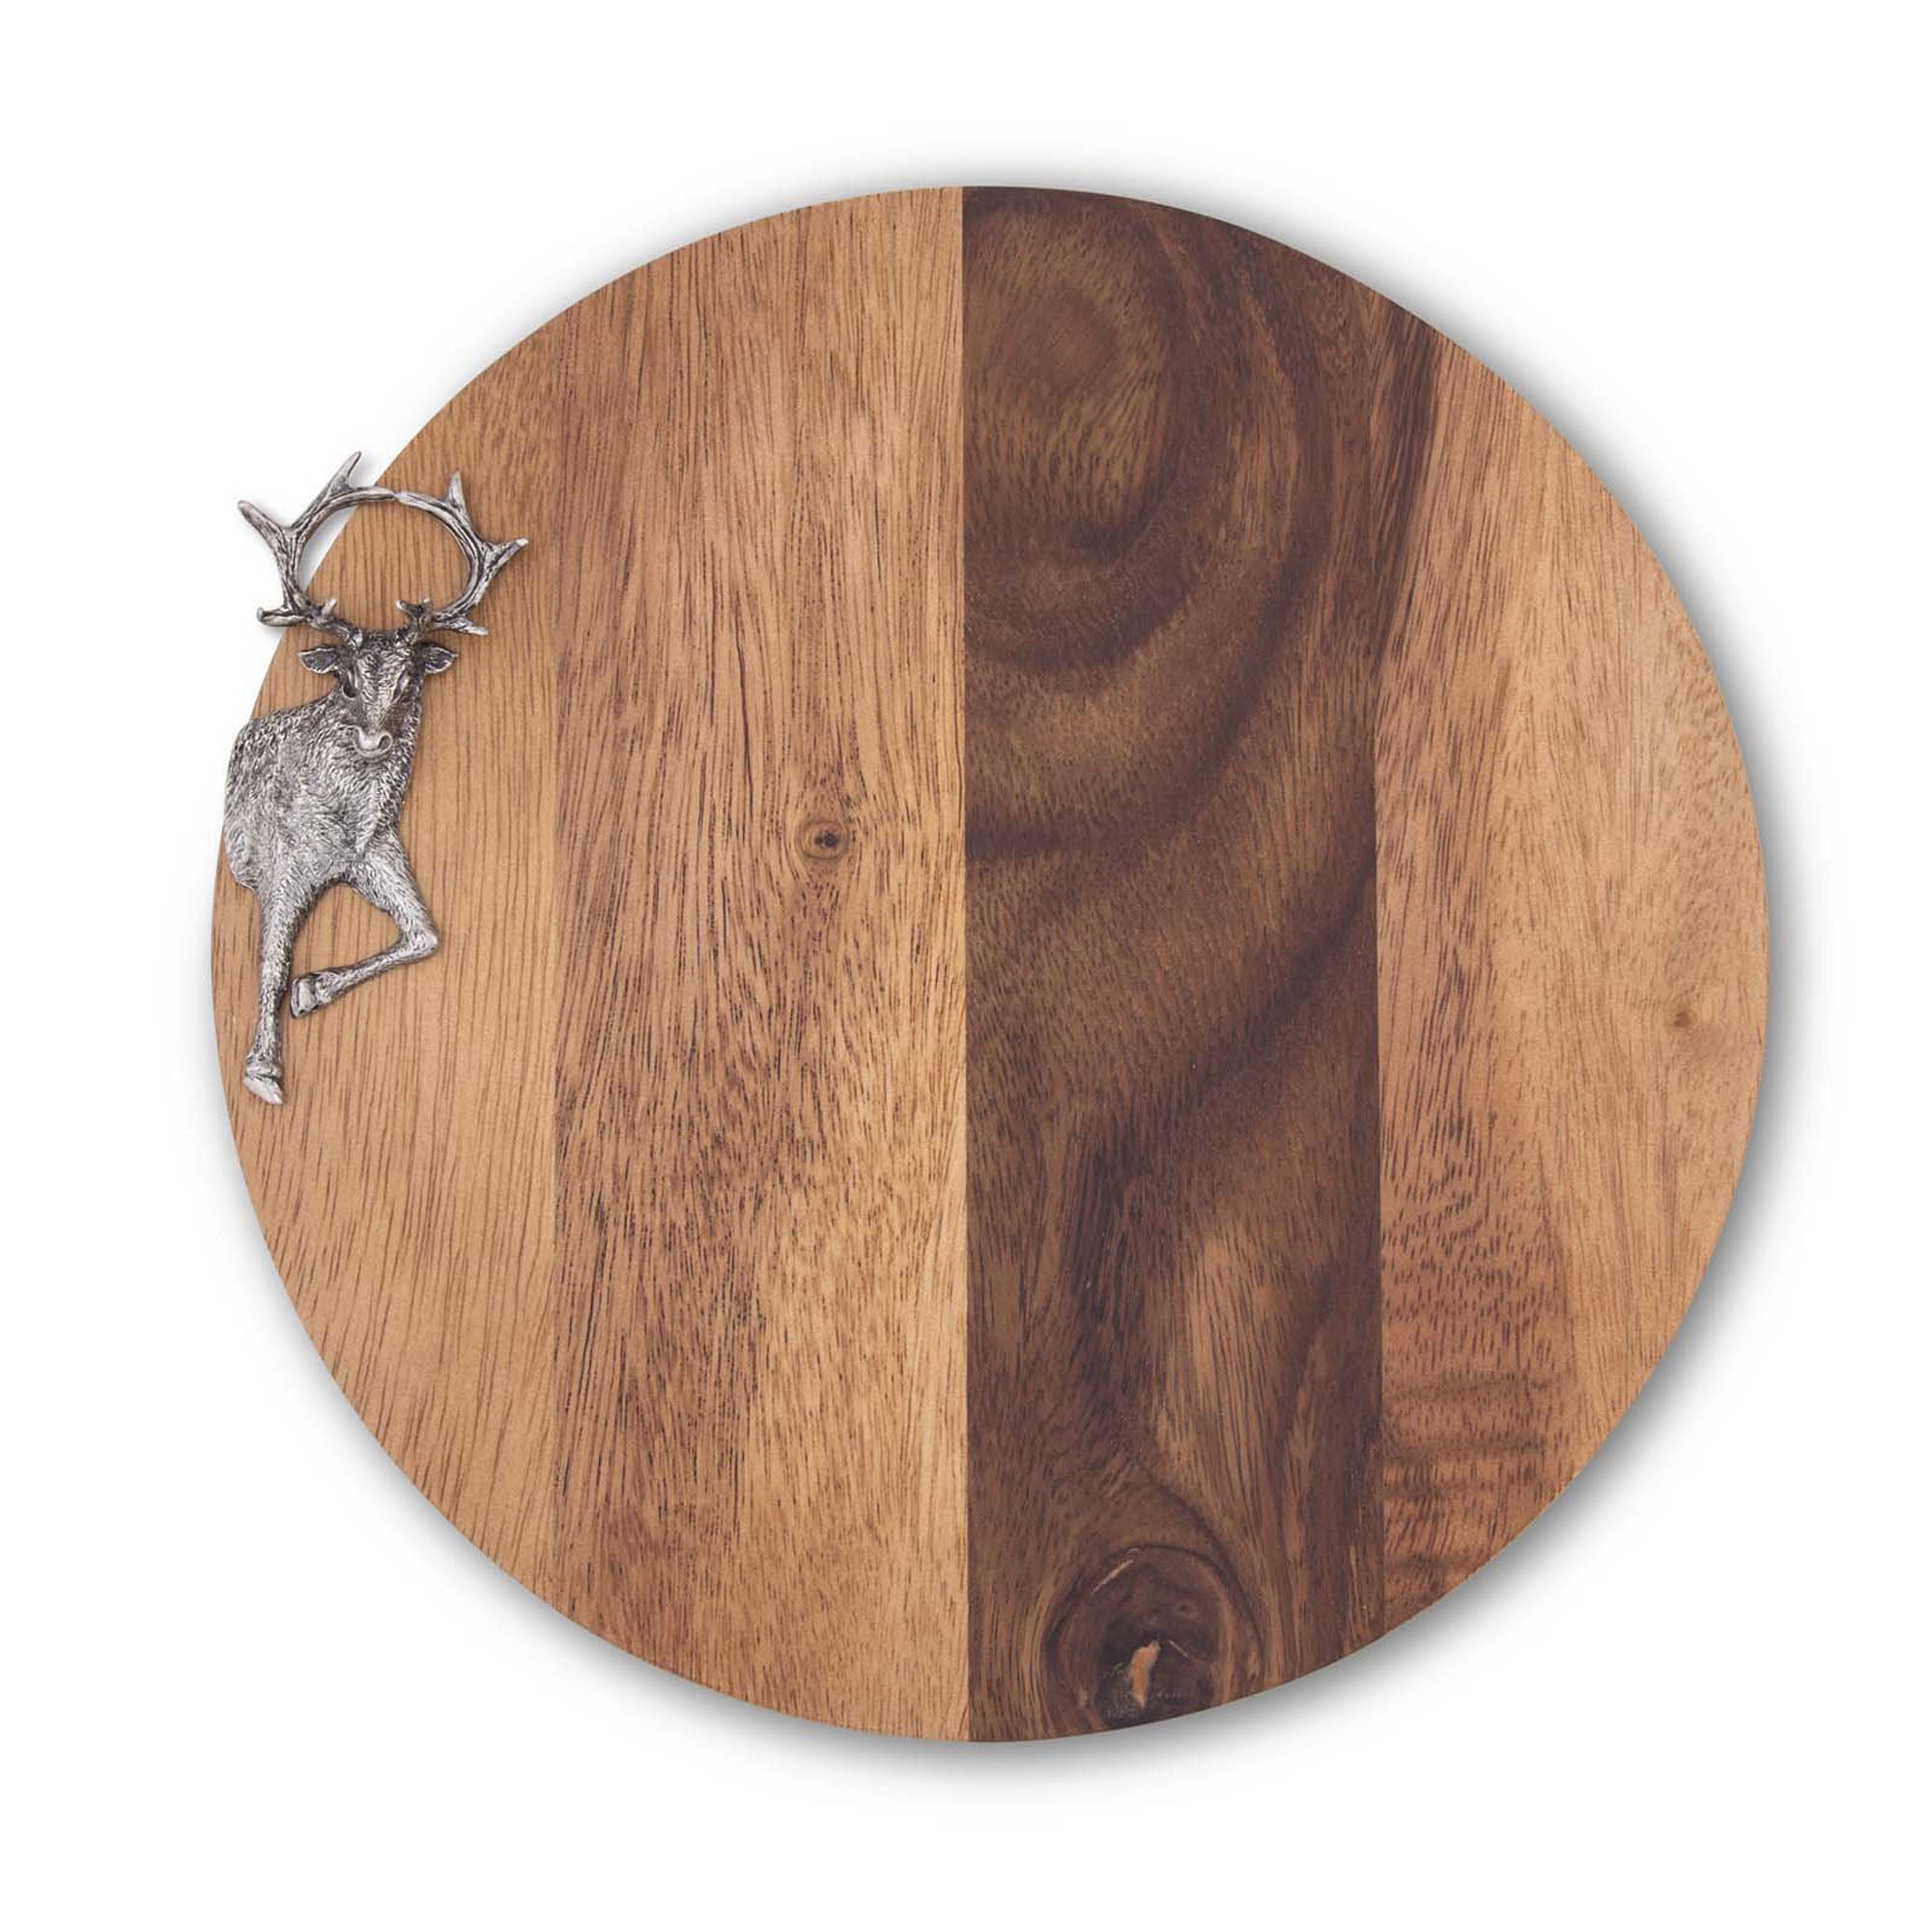 Vagabond House Stag Cheese Board Product Image